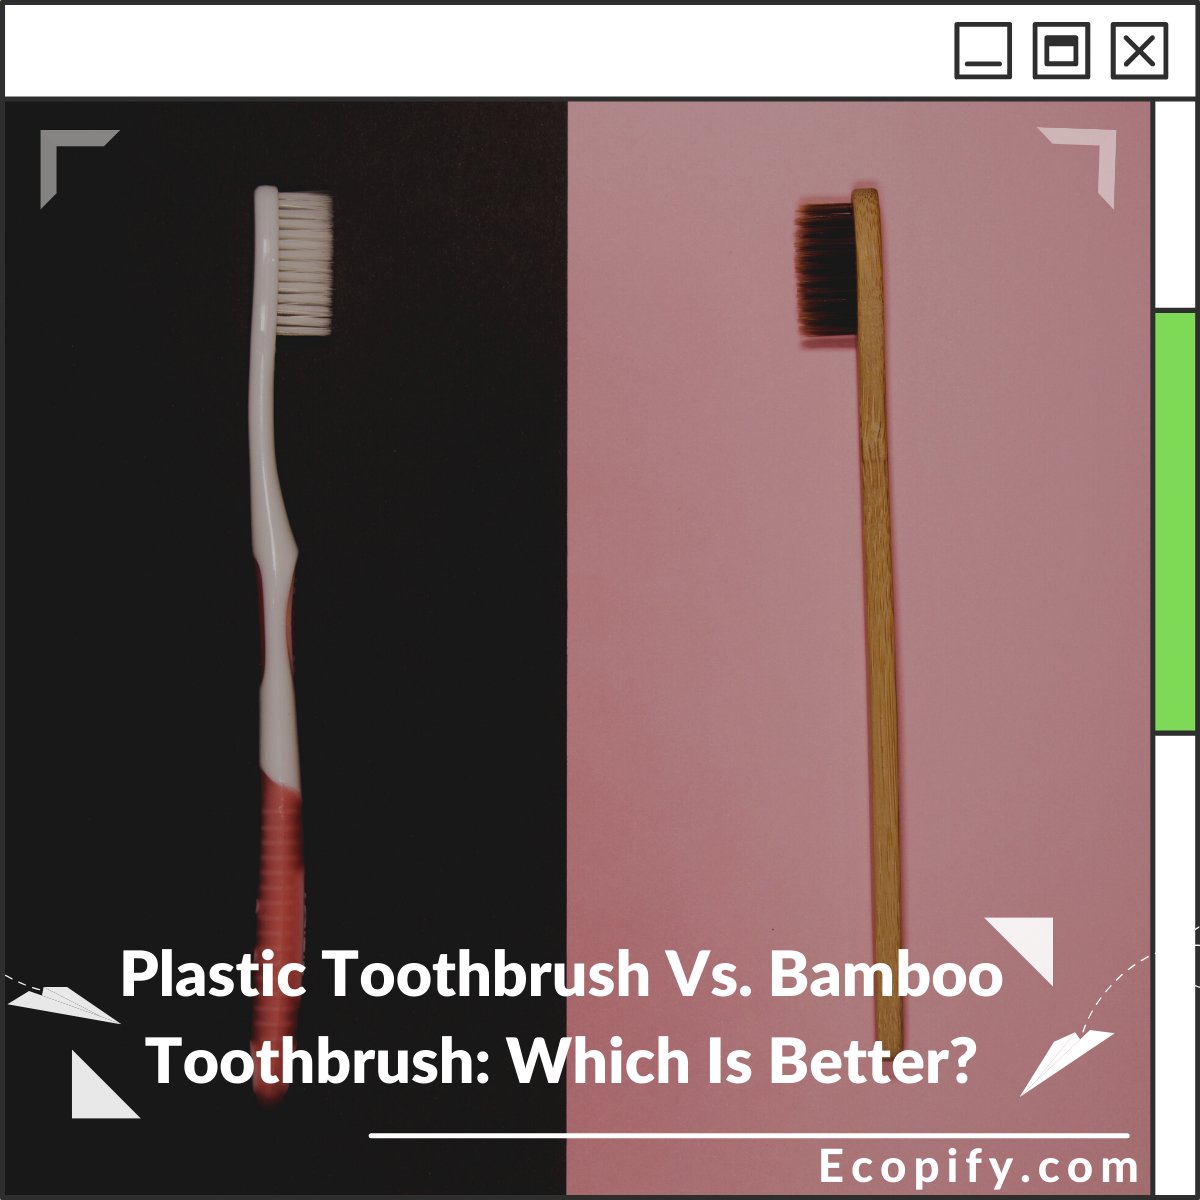 Plastic Toothbrush Vs. Bamboo Toothbrush: Which Is Better?